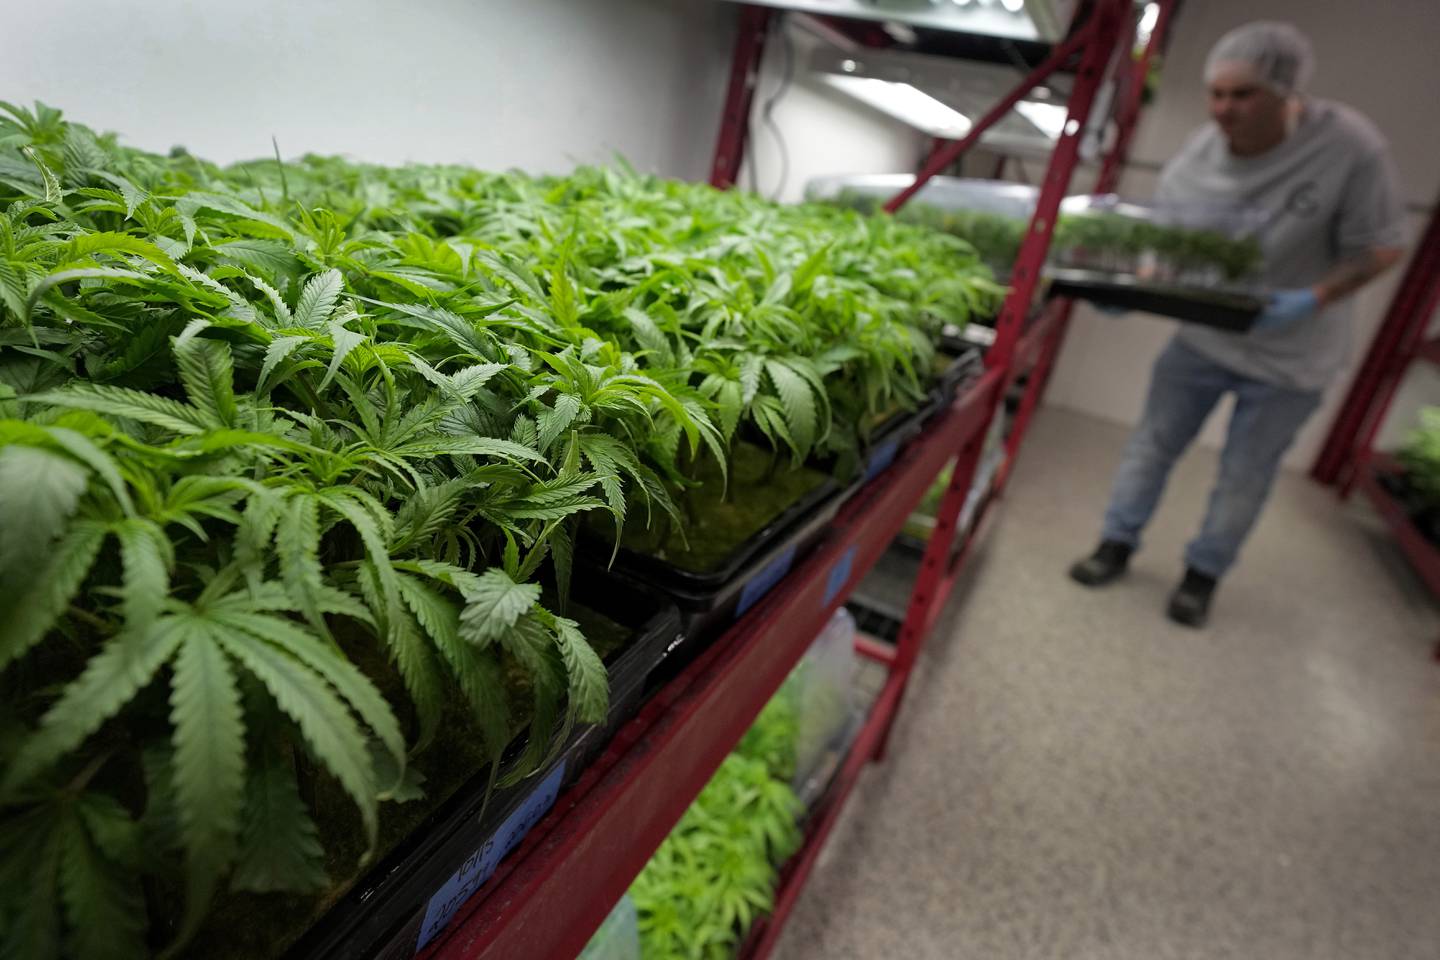 Green marijuana plants are organized on red racks. In the background a man wearing a hair net and latex gloves loads a tray of plants into another rack.